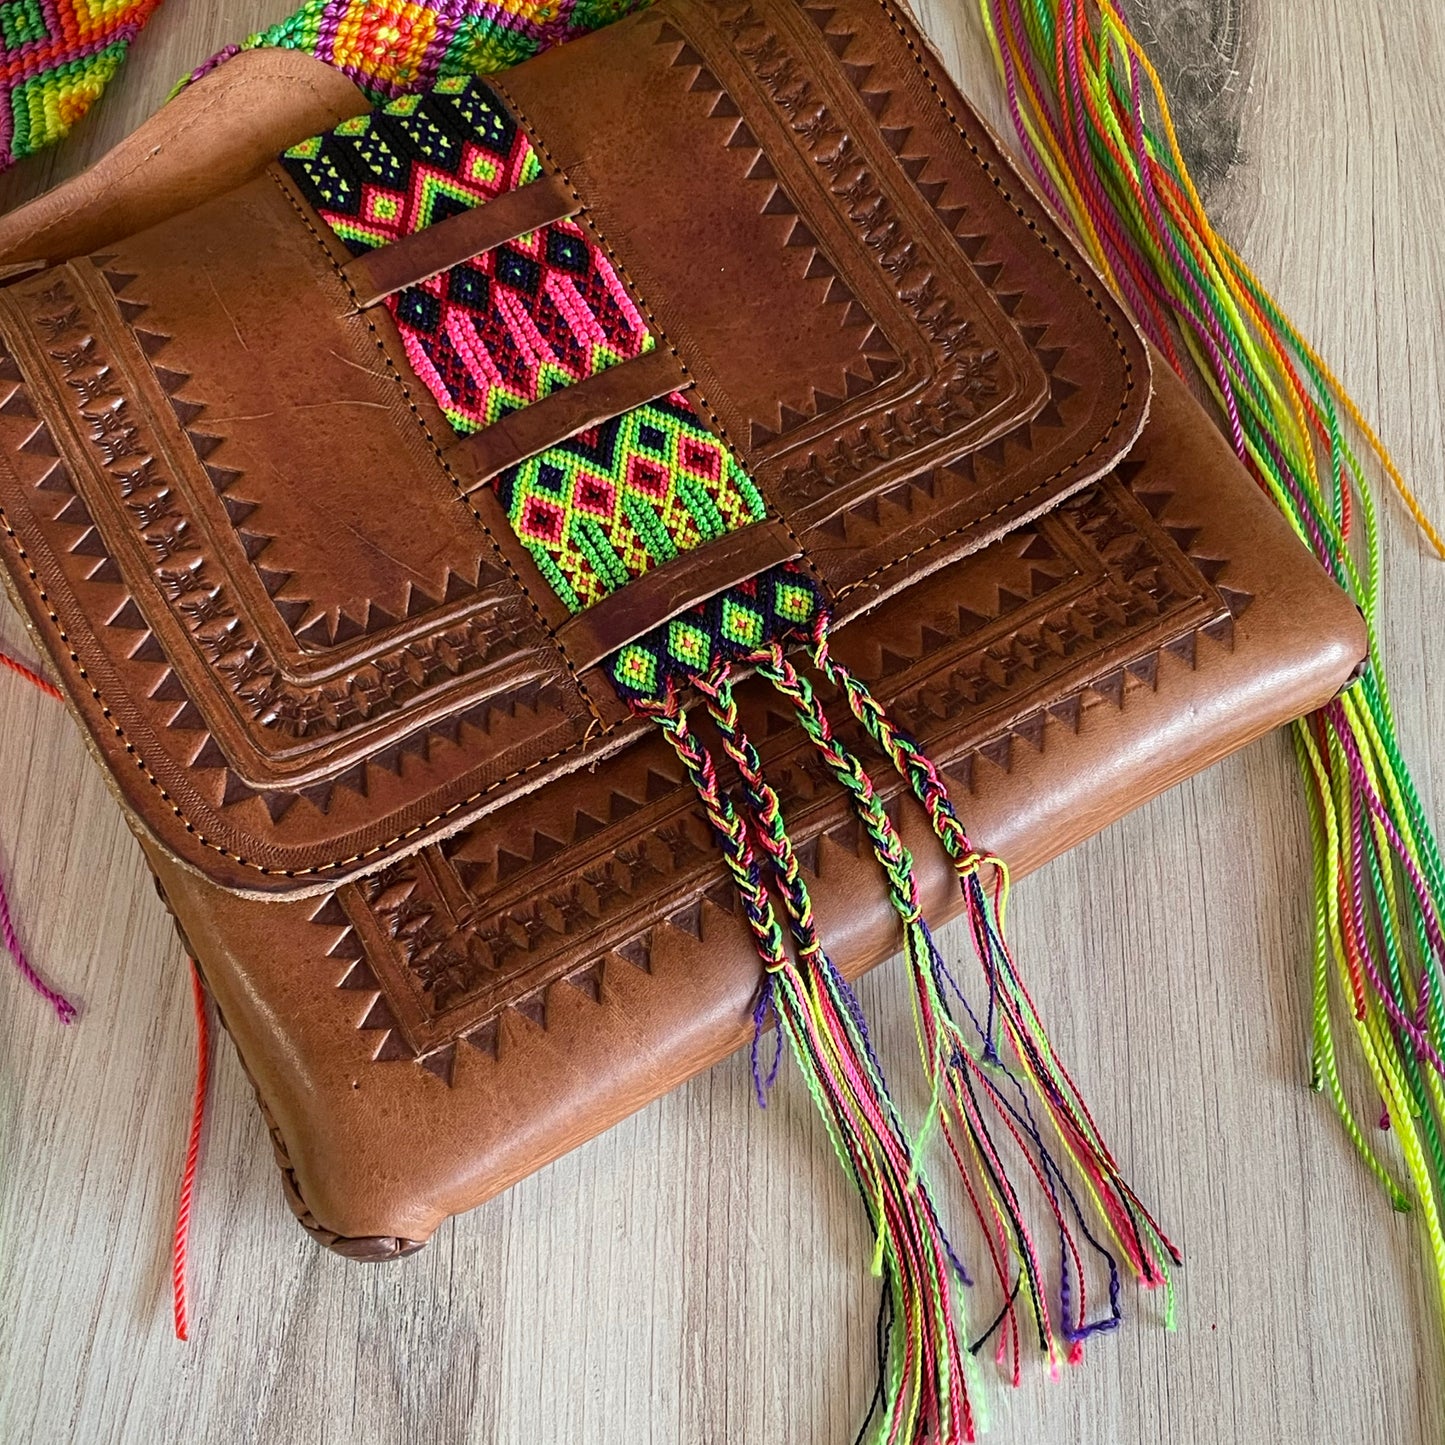 Mexican Leather Envelope Crossbody Bag Large- Hand Tooled